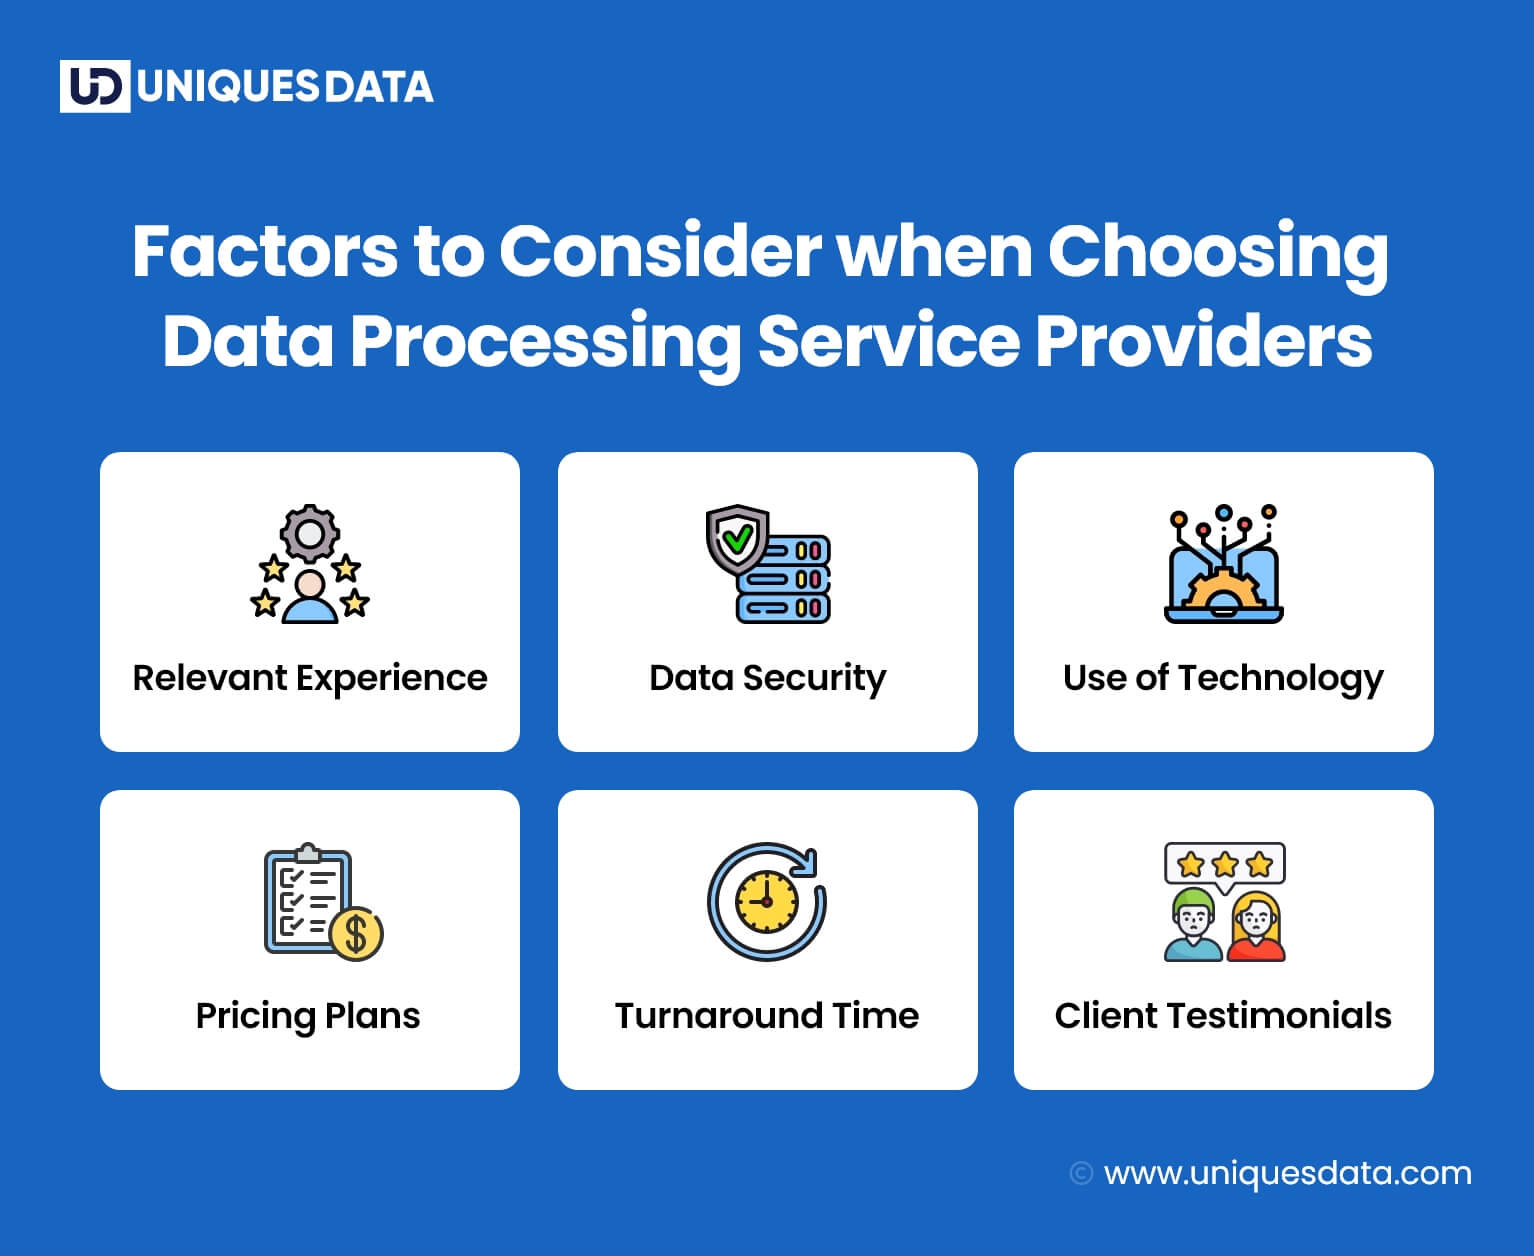 Factors to Consider when Choosing Data Processing Service Providers